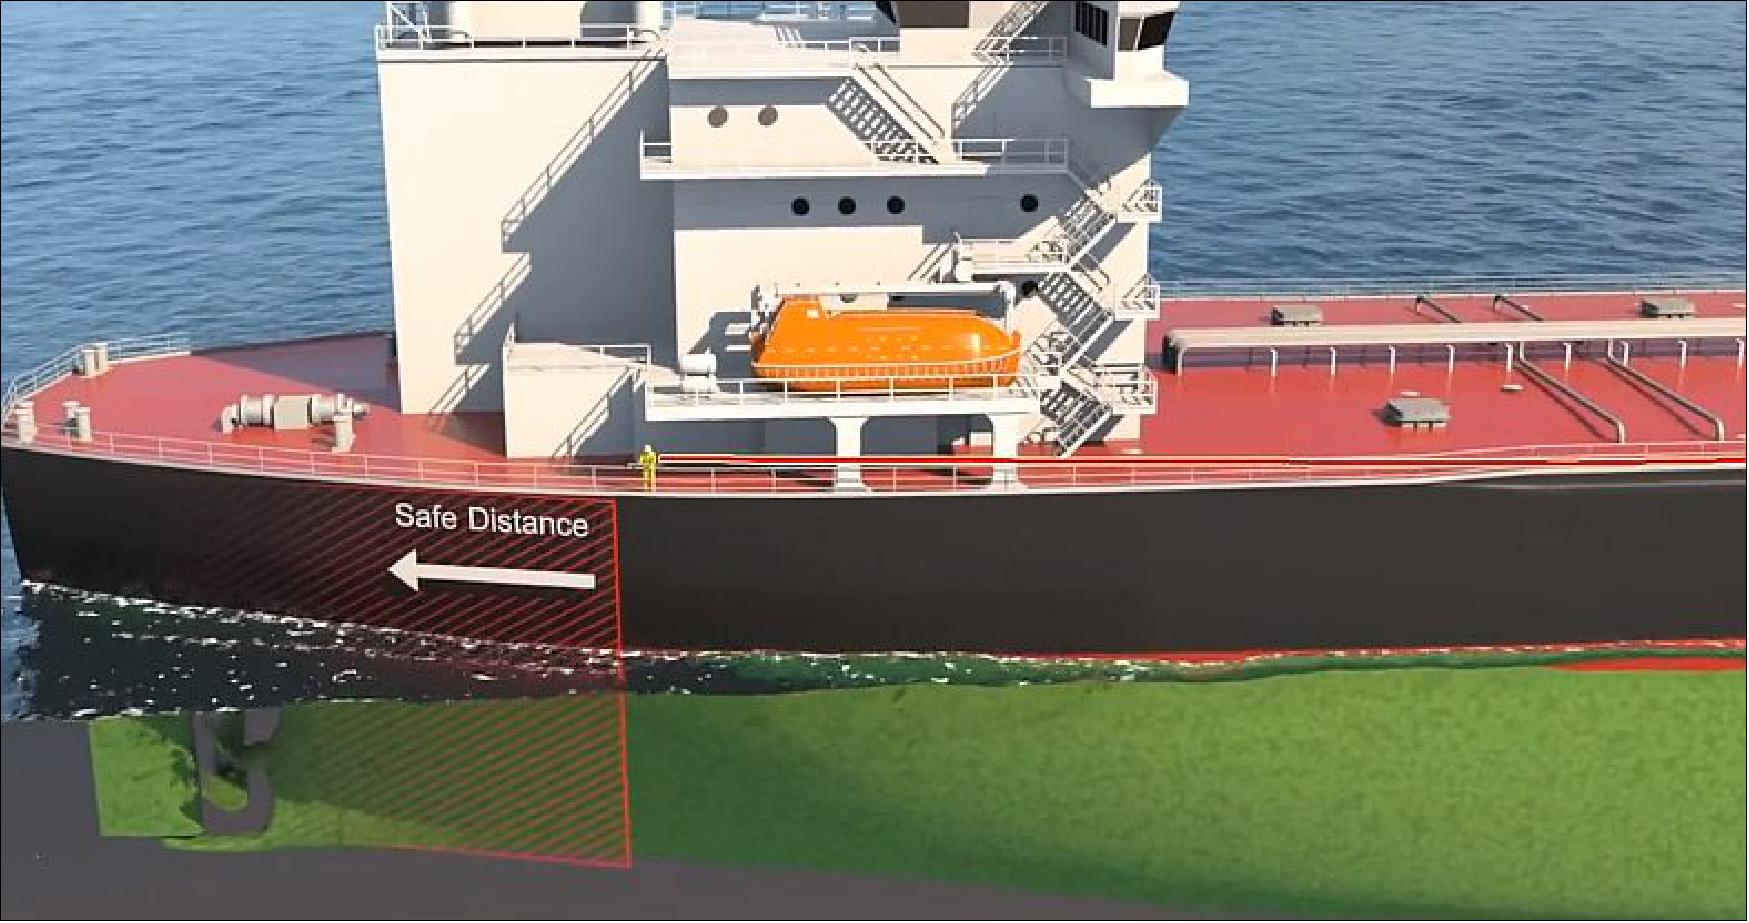 Figure 134: Shipshave’s ITCH performs hull cleaning while the ship is in operation to prevent barnacle growth and reduce CO2 emissions (image credit: Shipshave)